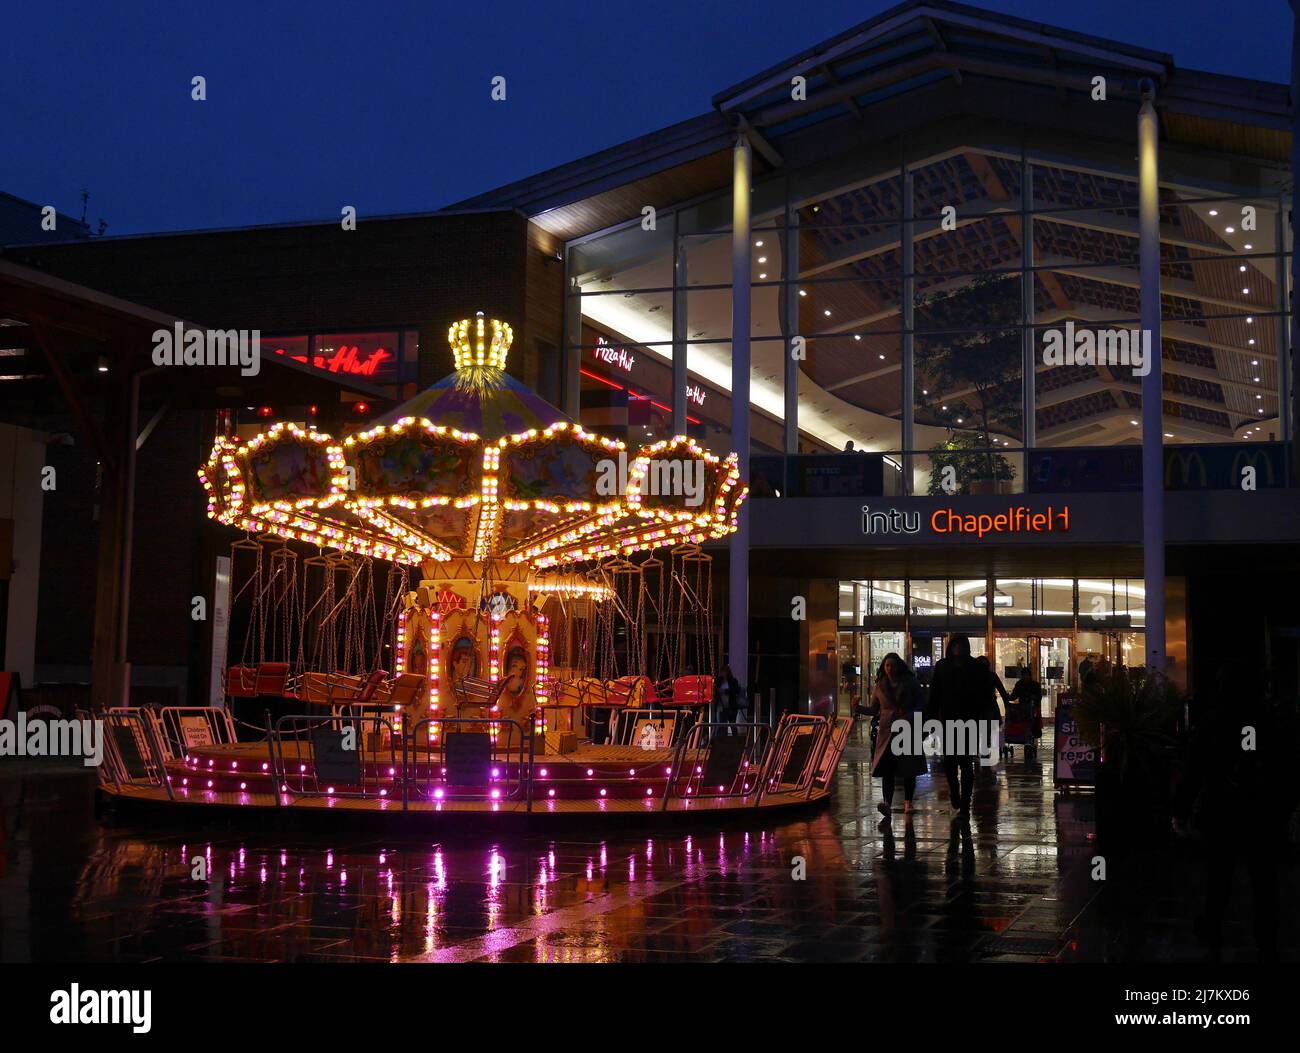 Children's Merry-go-Round Illuminated at Nighttime, outside The Chapelfield Shopping Center in The City of Norwich, Norfolk, England, UK Stock Photo